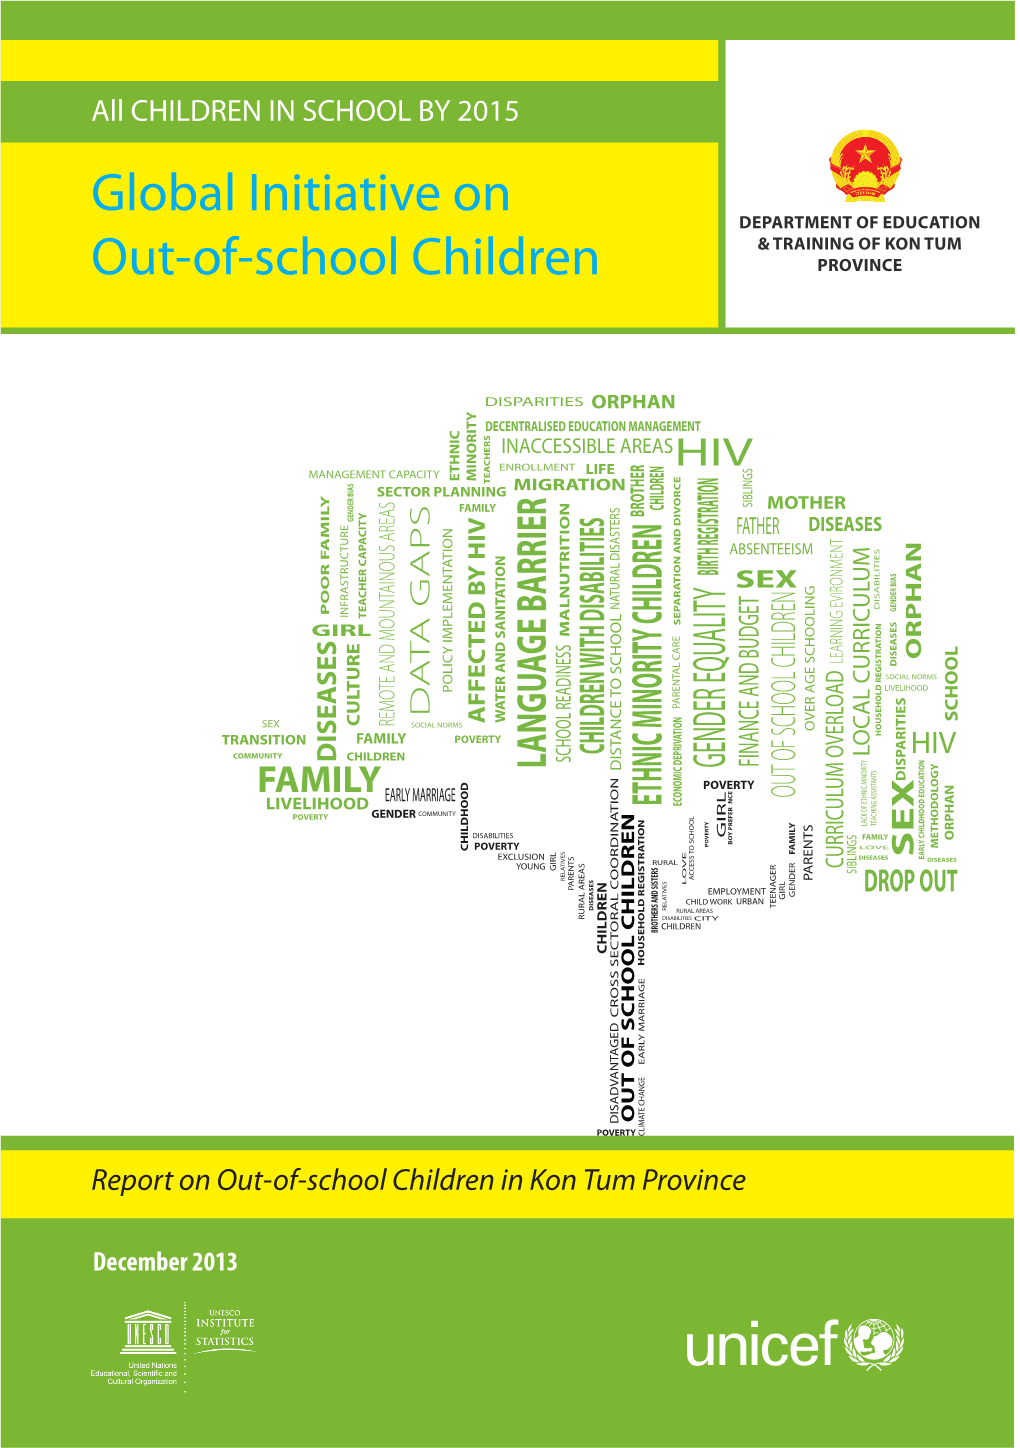 Global Initiative on Out-Of-School Children